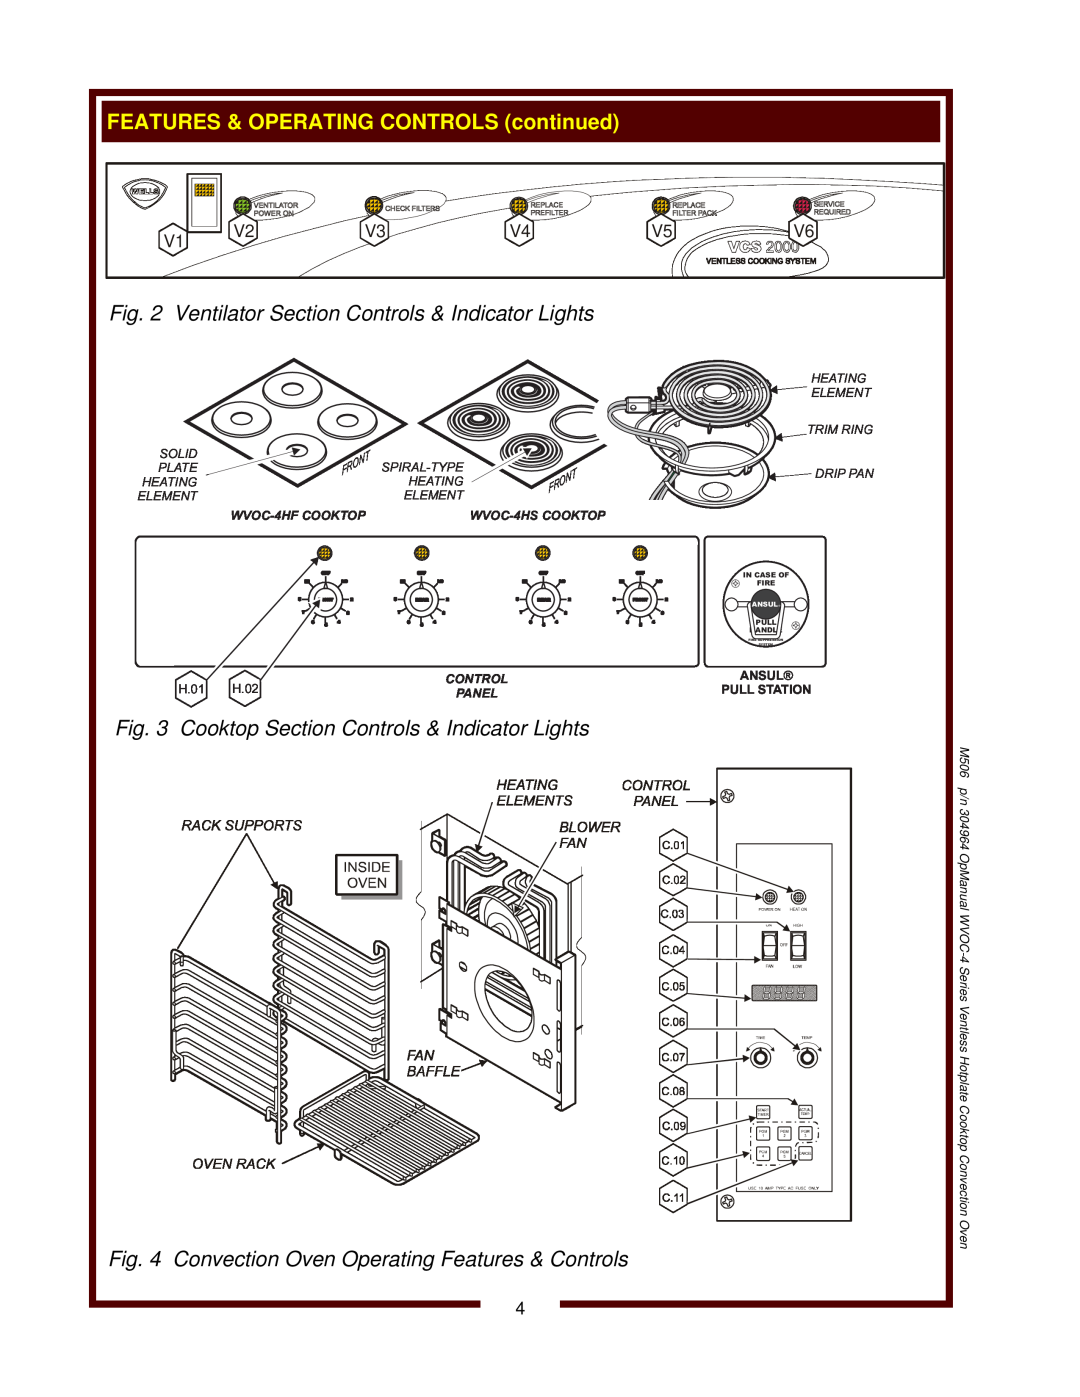 Wells WVOC-4HS operation manual WVOC-4HFCOOKTOP, H.01, H.02, Ansul Pull Station 